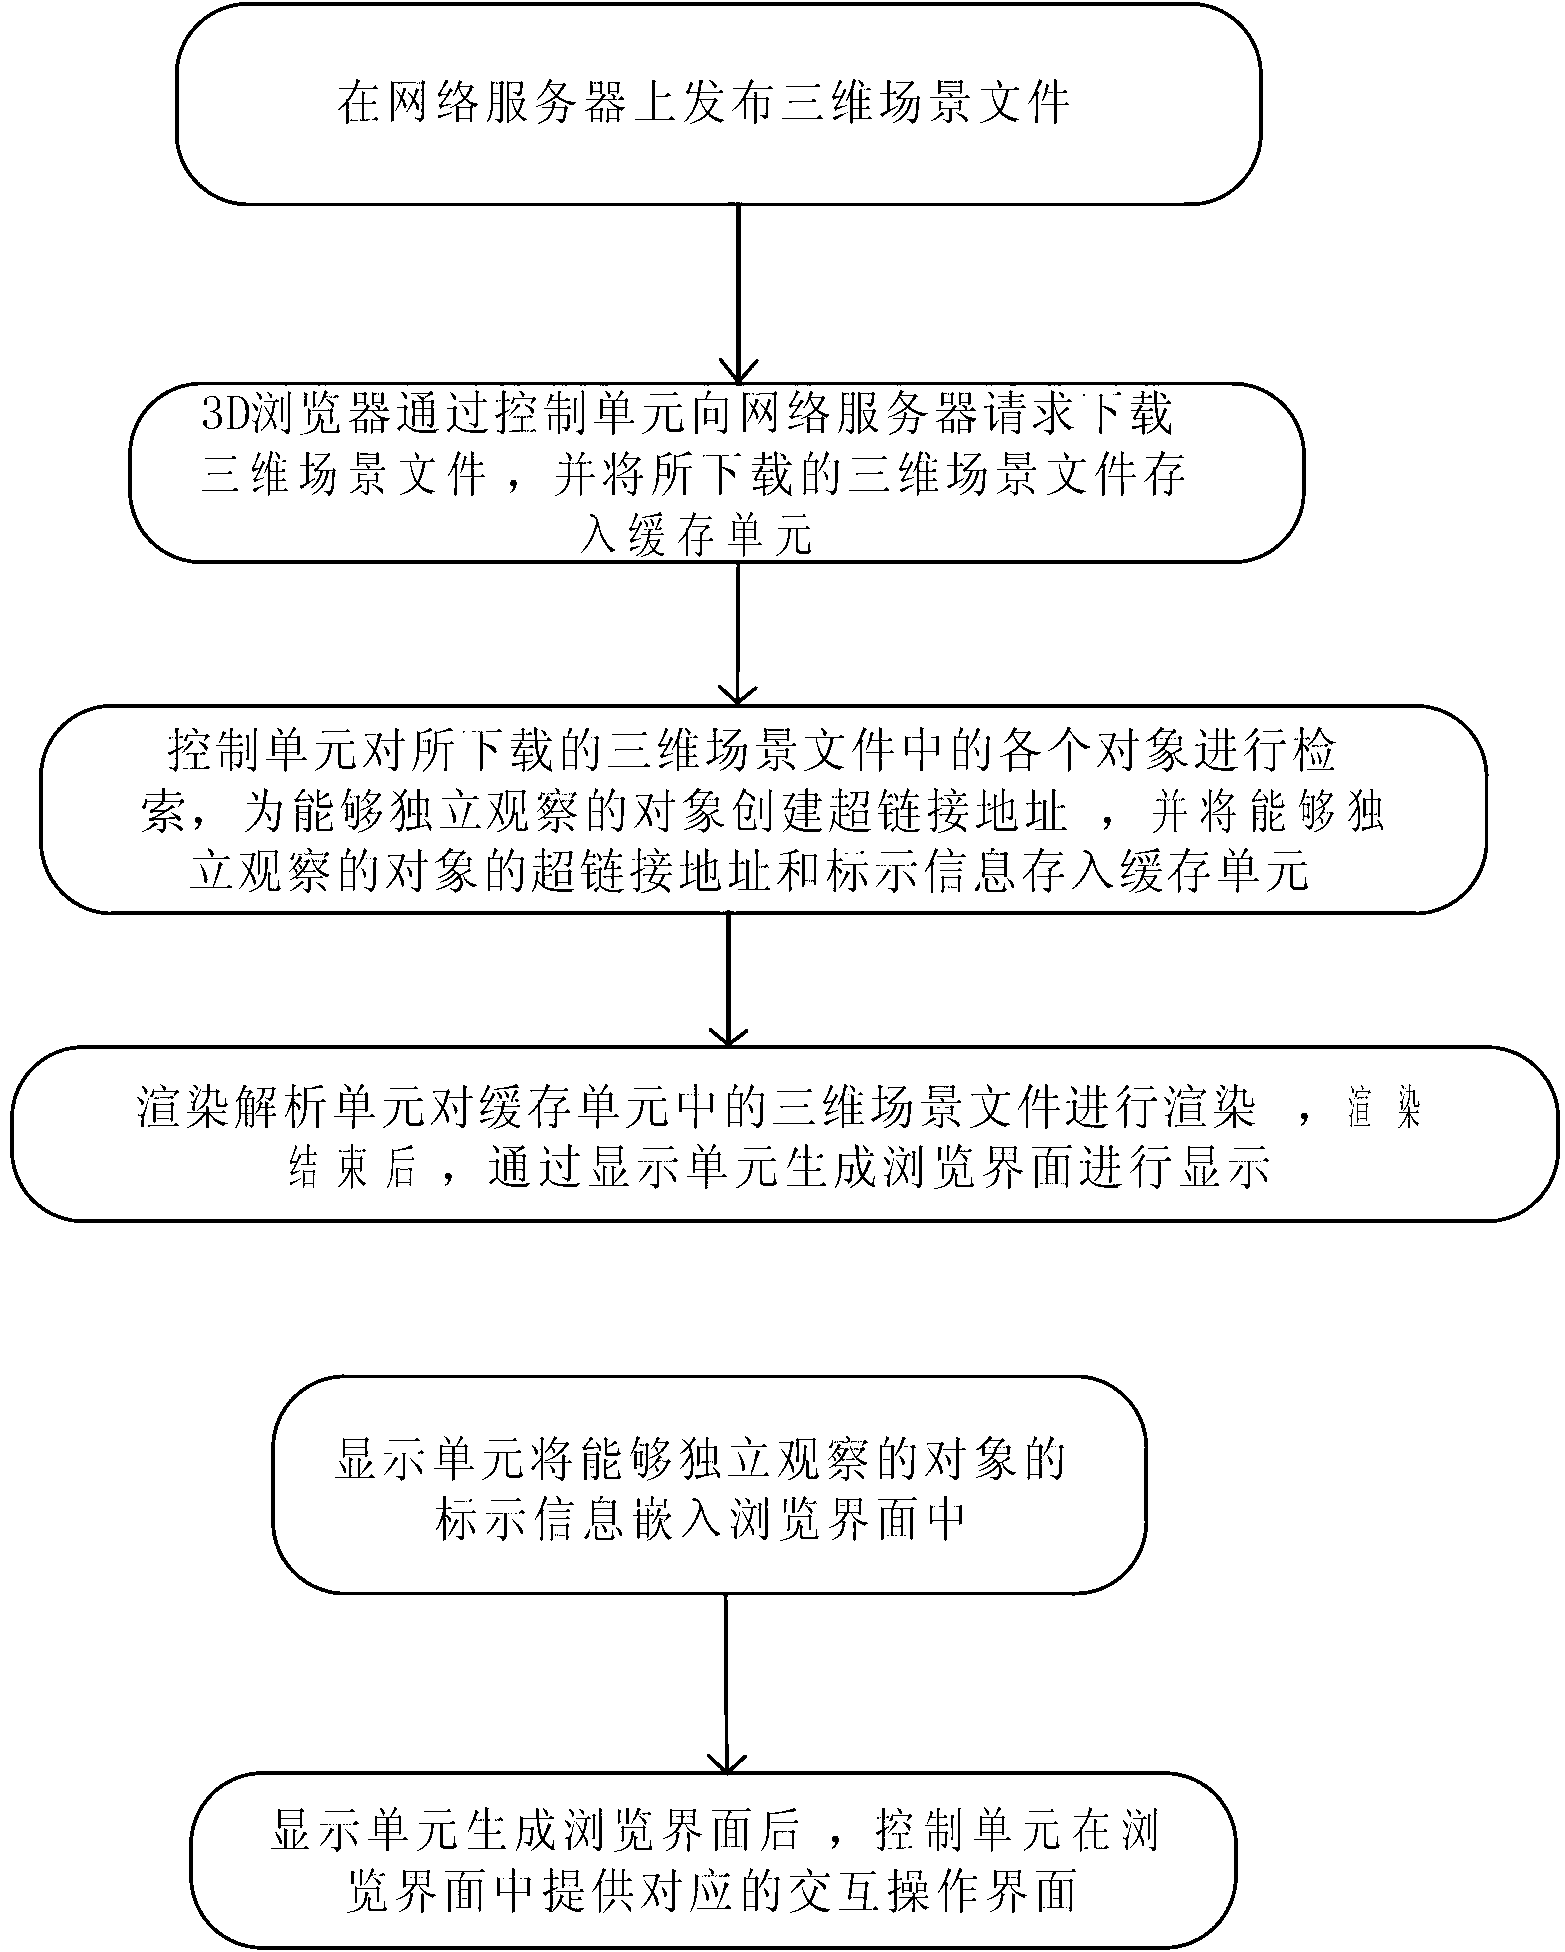 Mobile phone 3D (3-dimensional) browser system based on three-dimensional panoramic hyperlink browse and application method